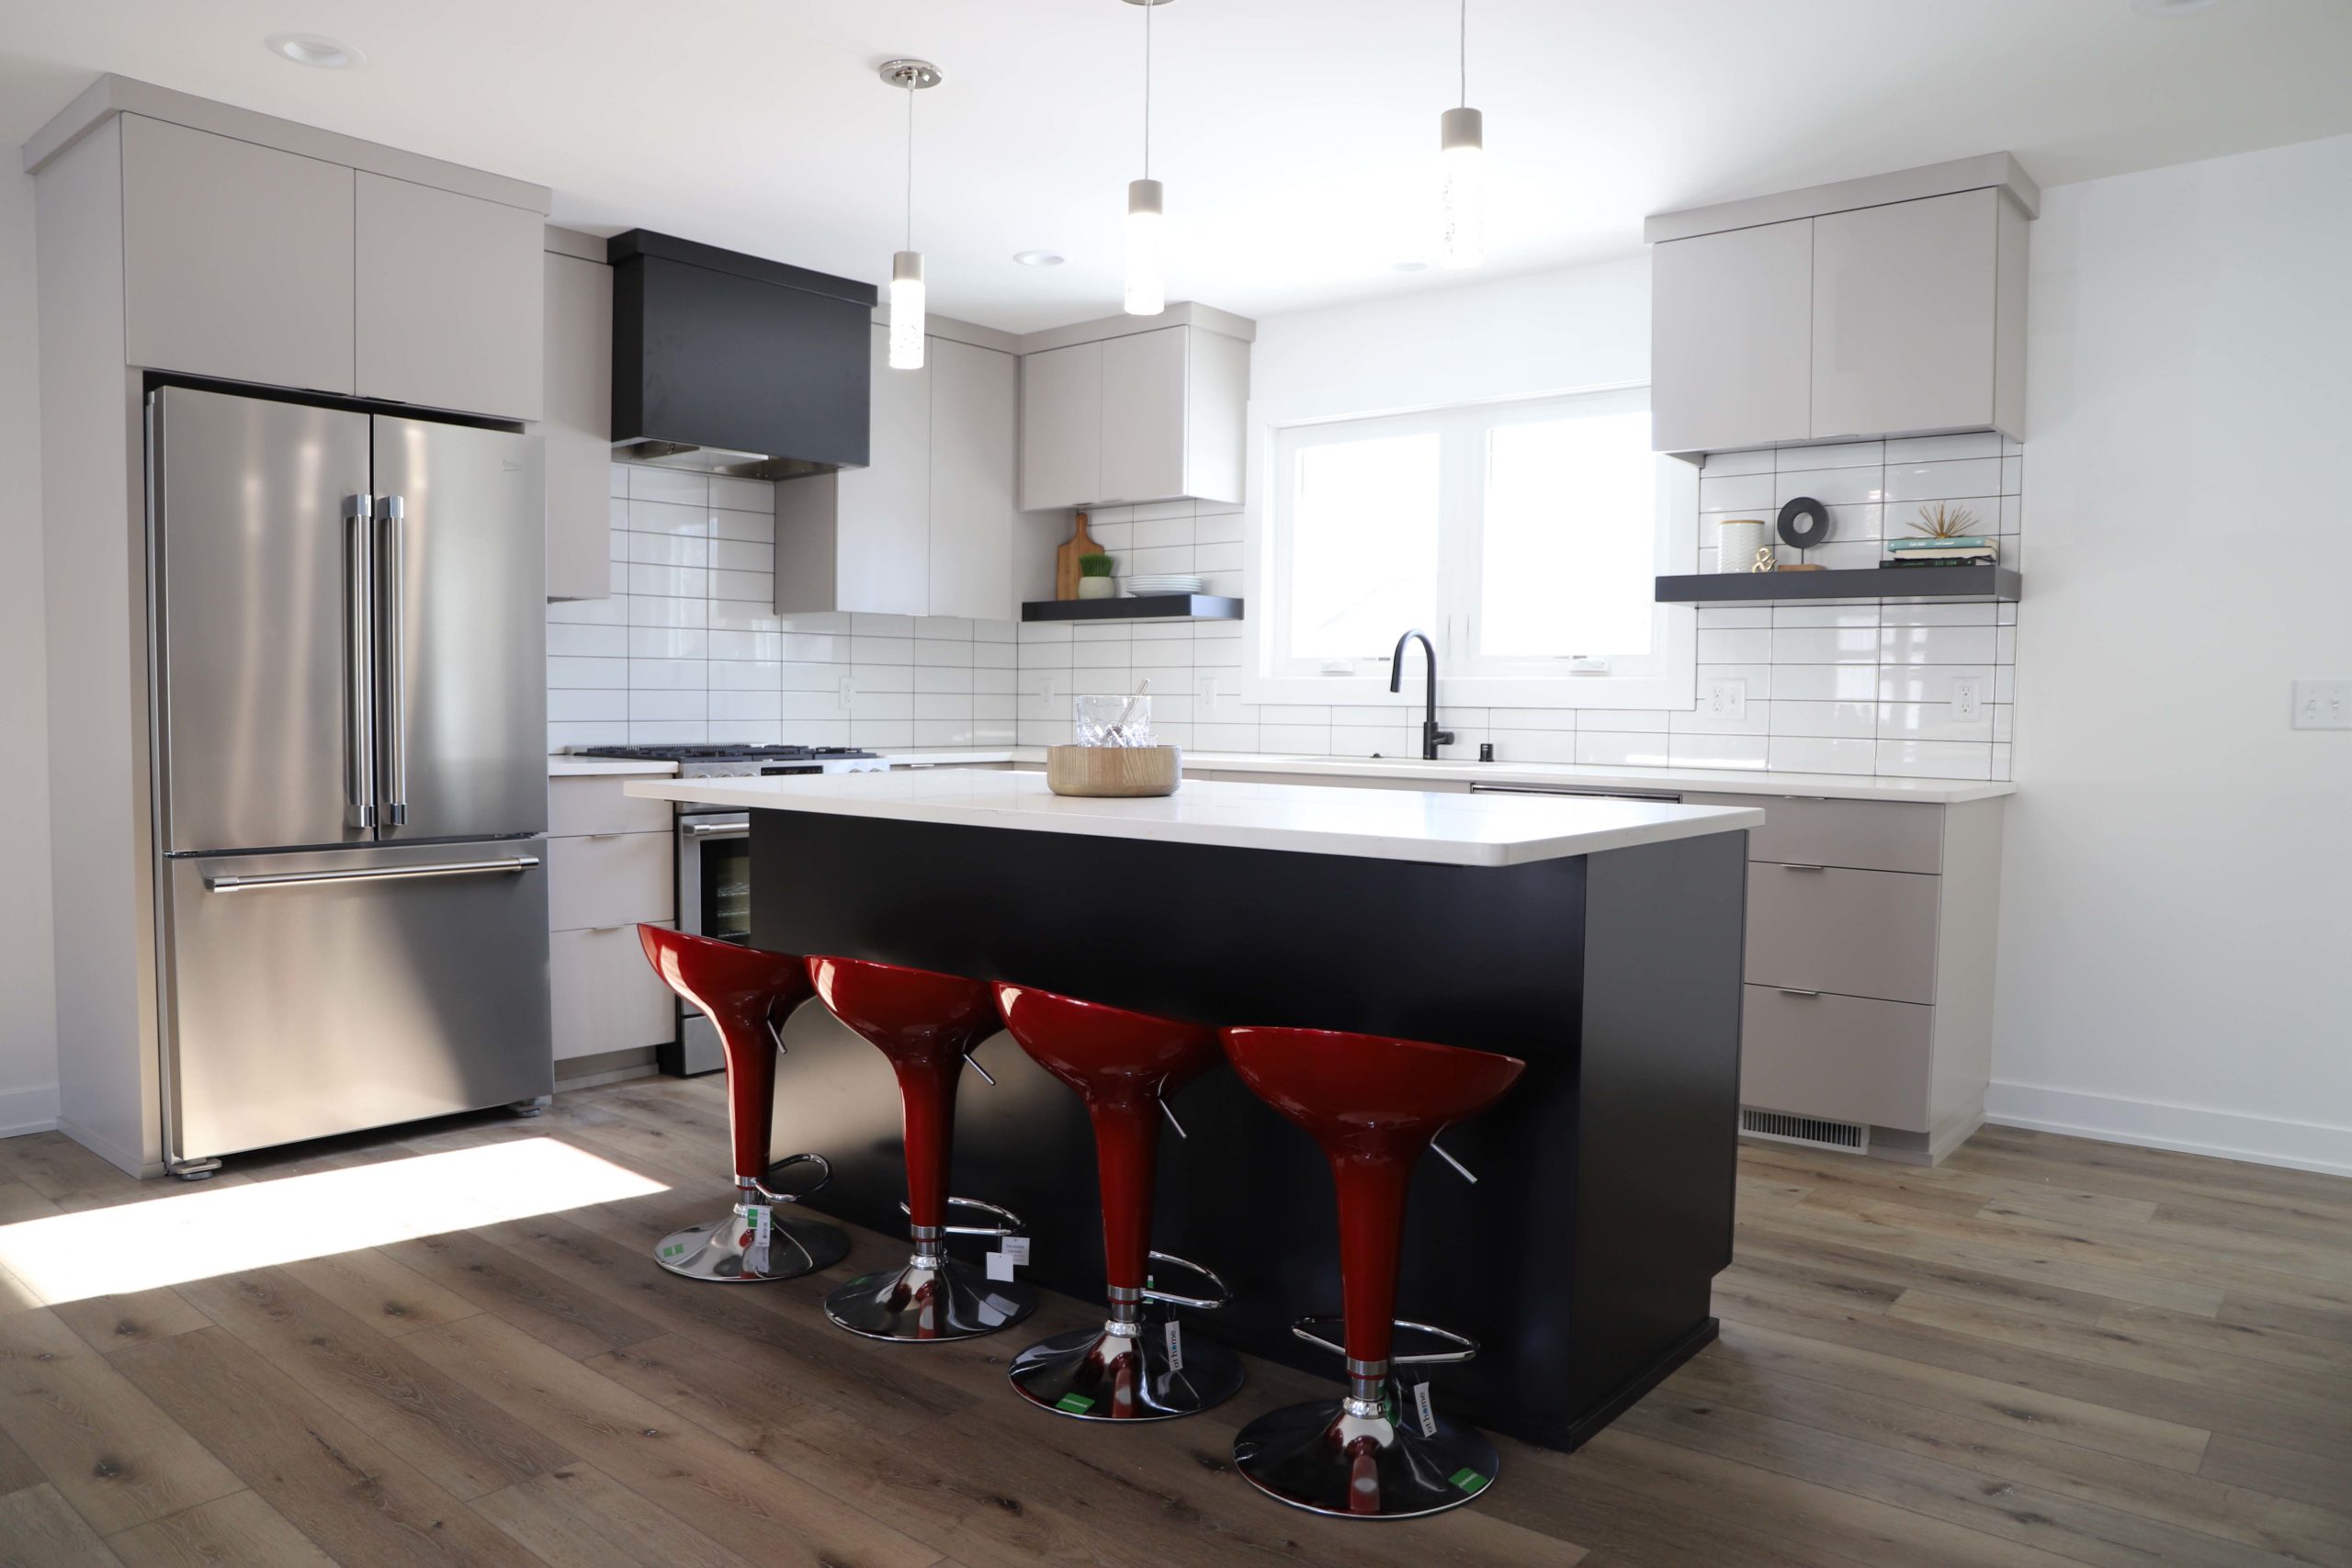 A kitchen with red stools and a black island.